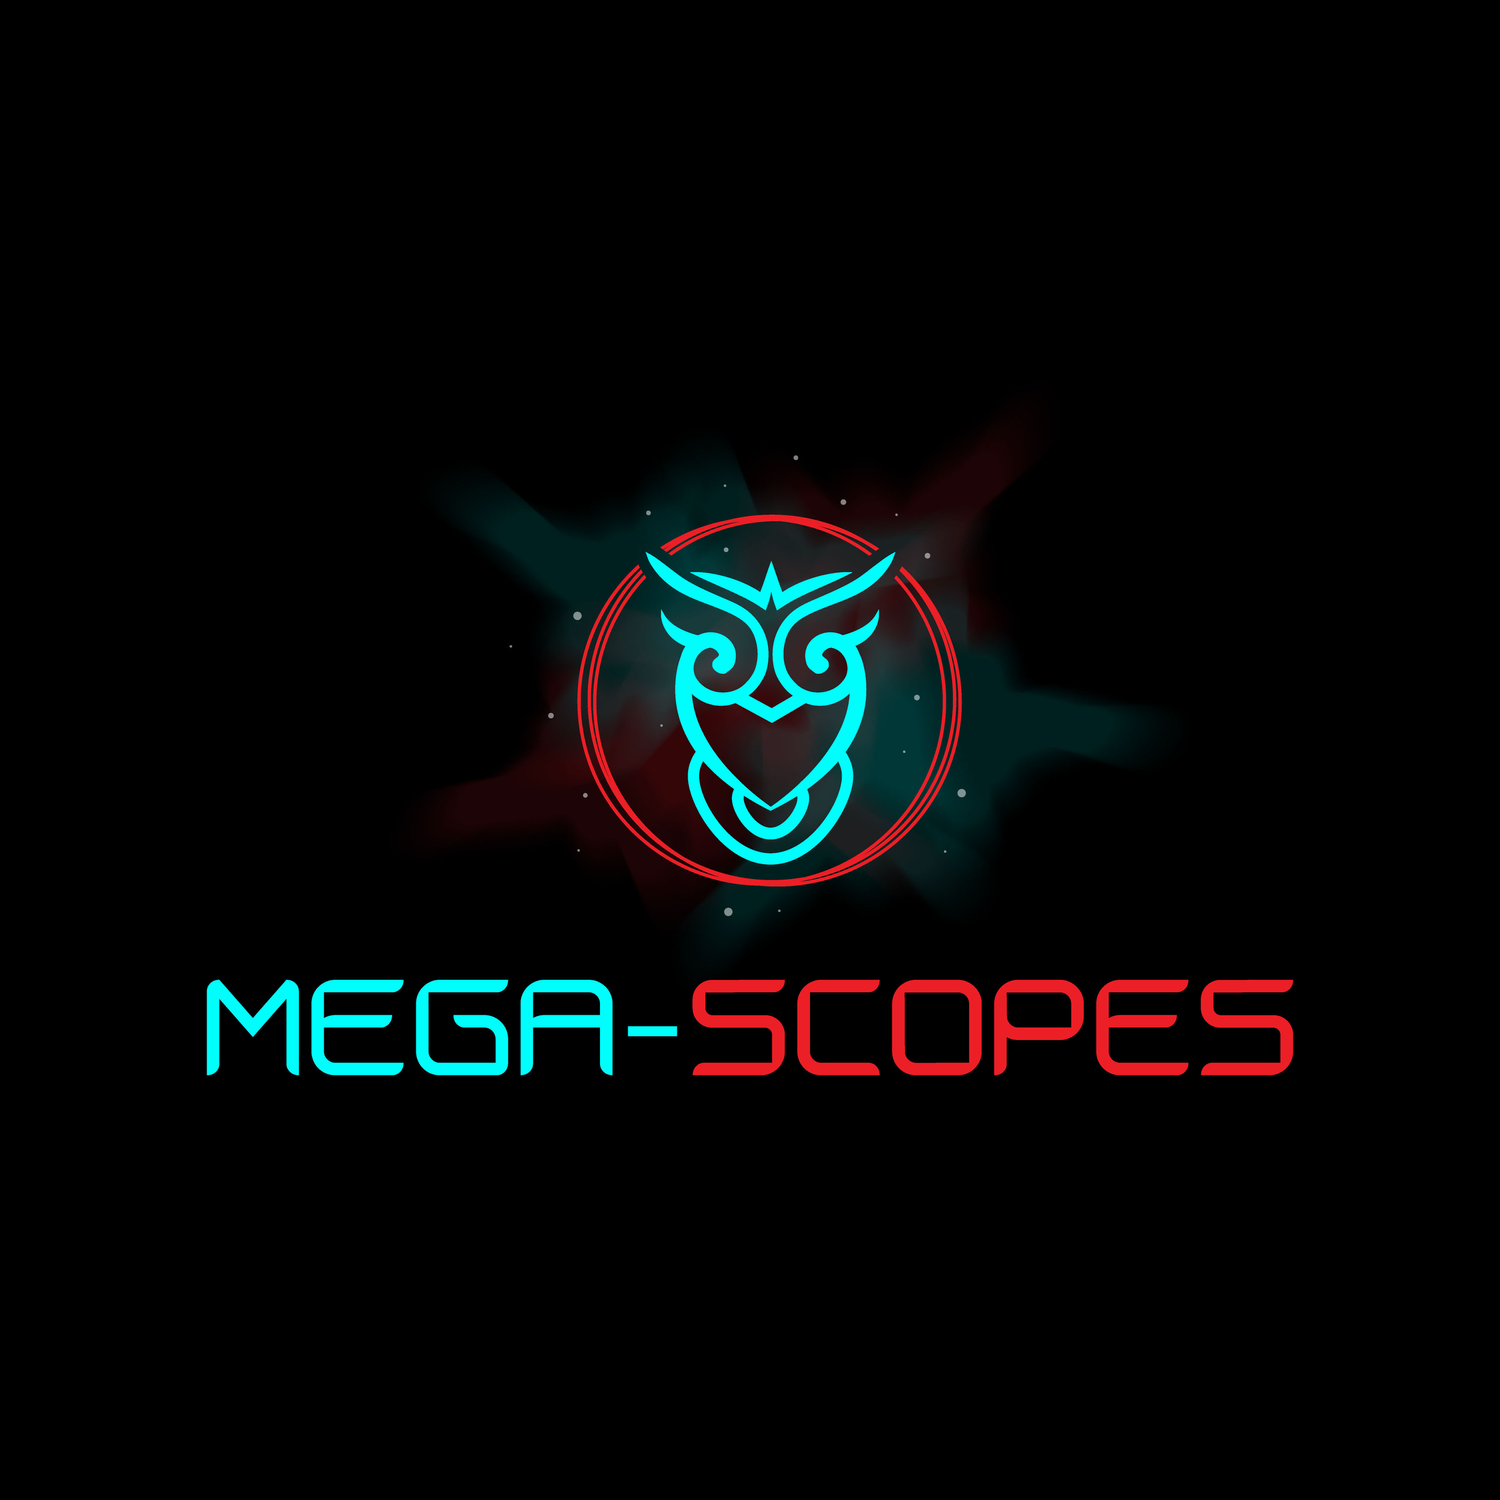 What Are The MEGA-SCOPES?